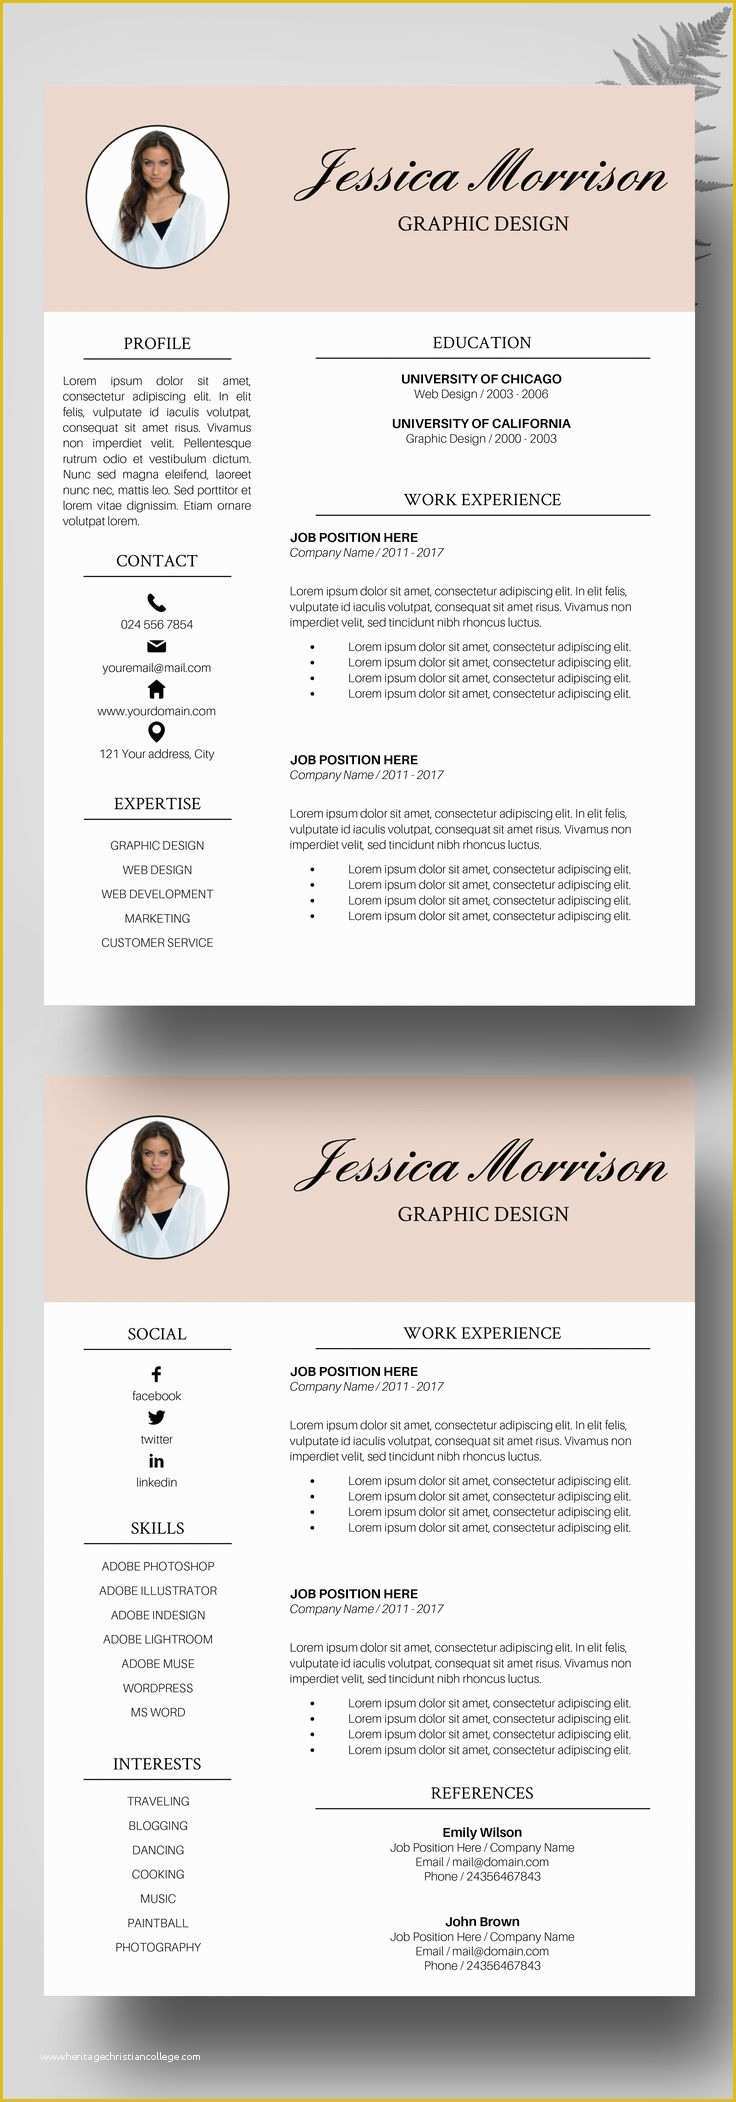 Free Modern Resume Templates for Word Of 25 Unique Templates Free Ideas On Pinterest